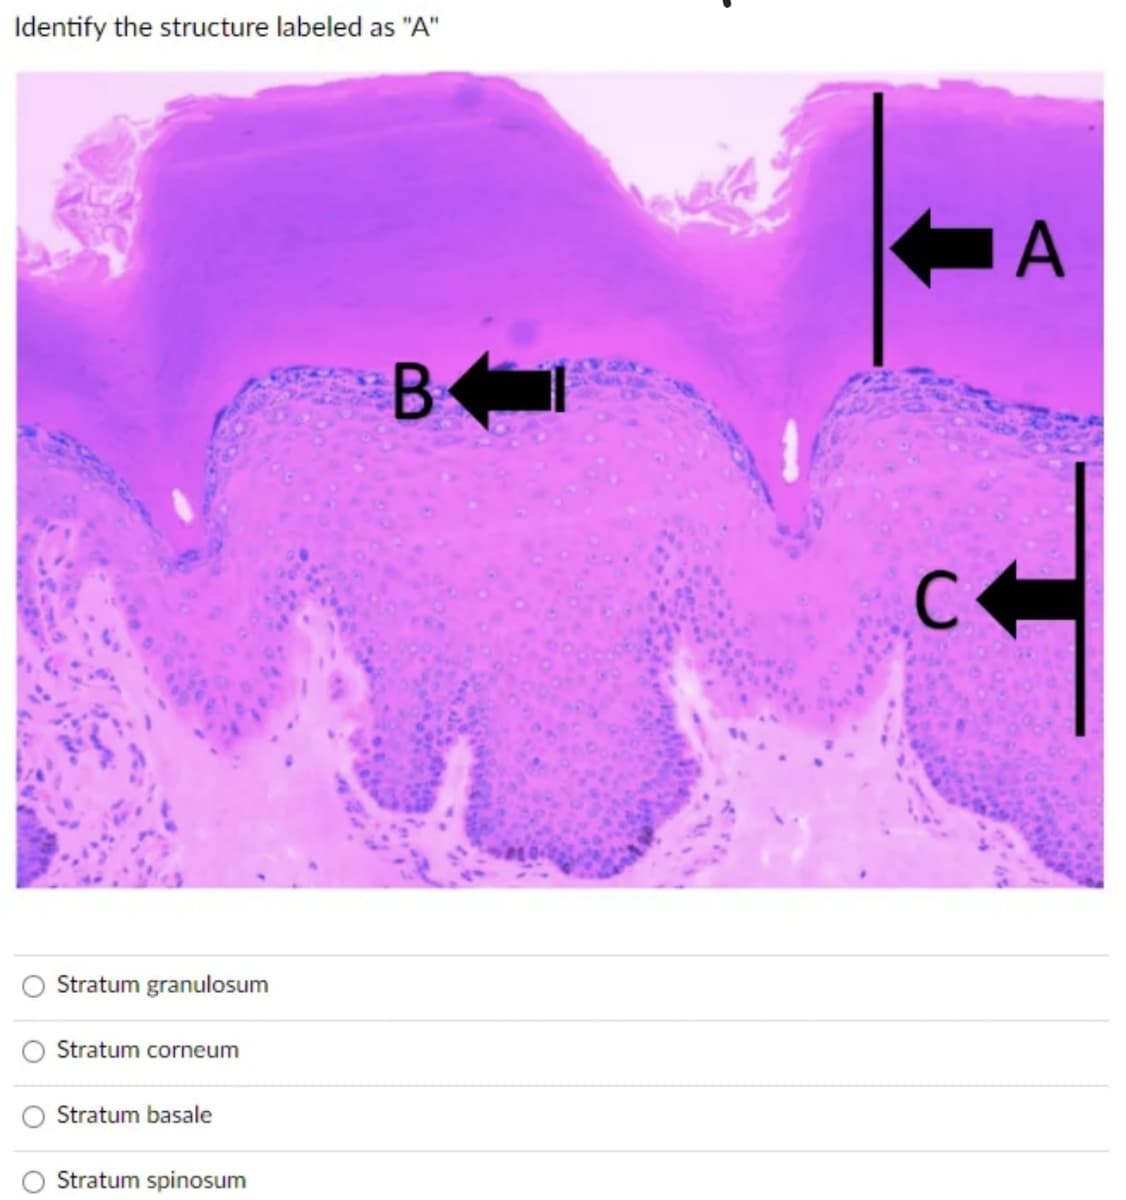 Identify the structure labeled as "A"
Stratum granulosum
Stratum corneum
Stratum basale
Stratum spinosum
B
C
A